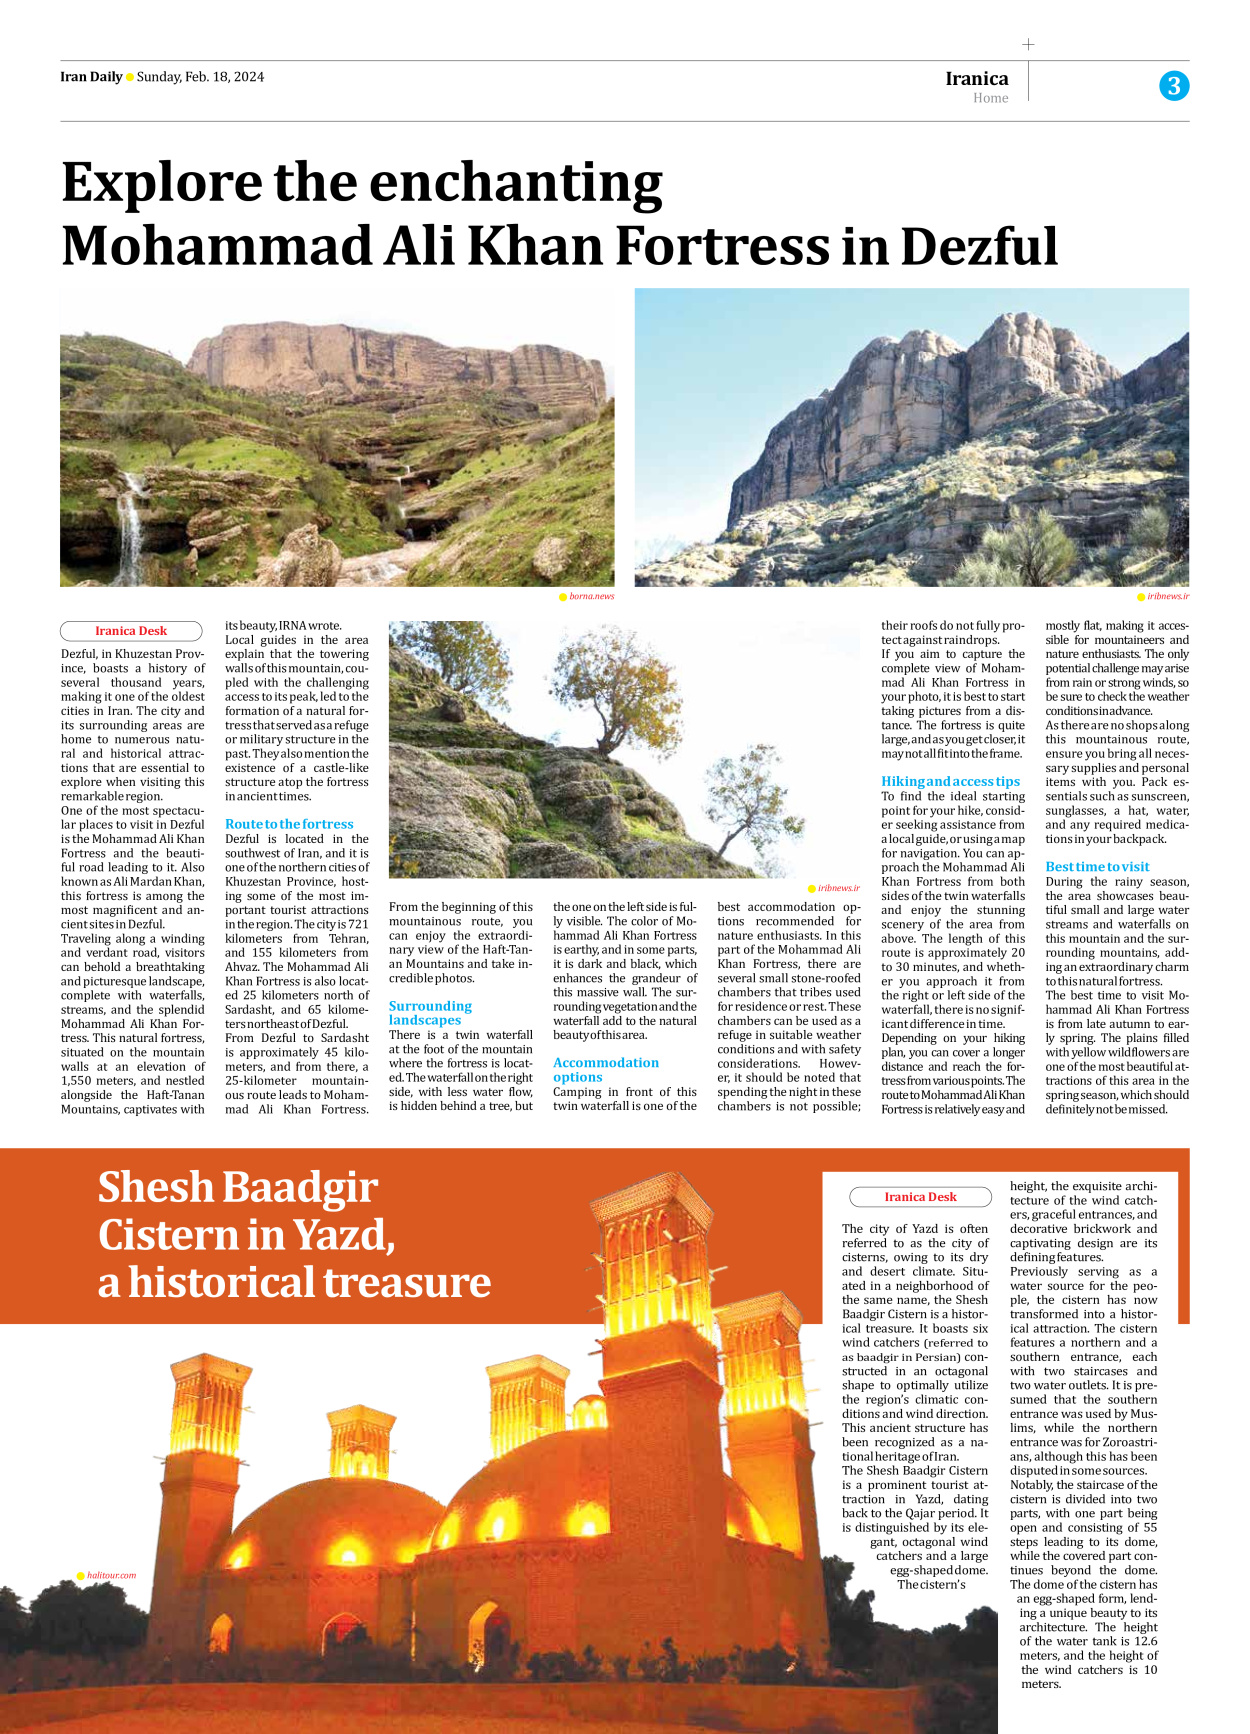 Iran Daily - Number Seven Thousand Five Hundred and Ten - 18 February 2024 - Page 3